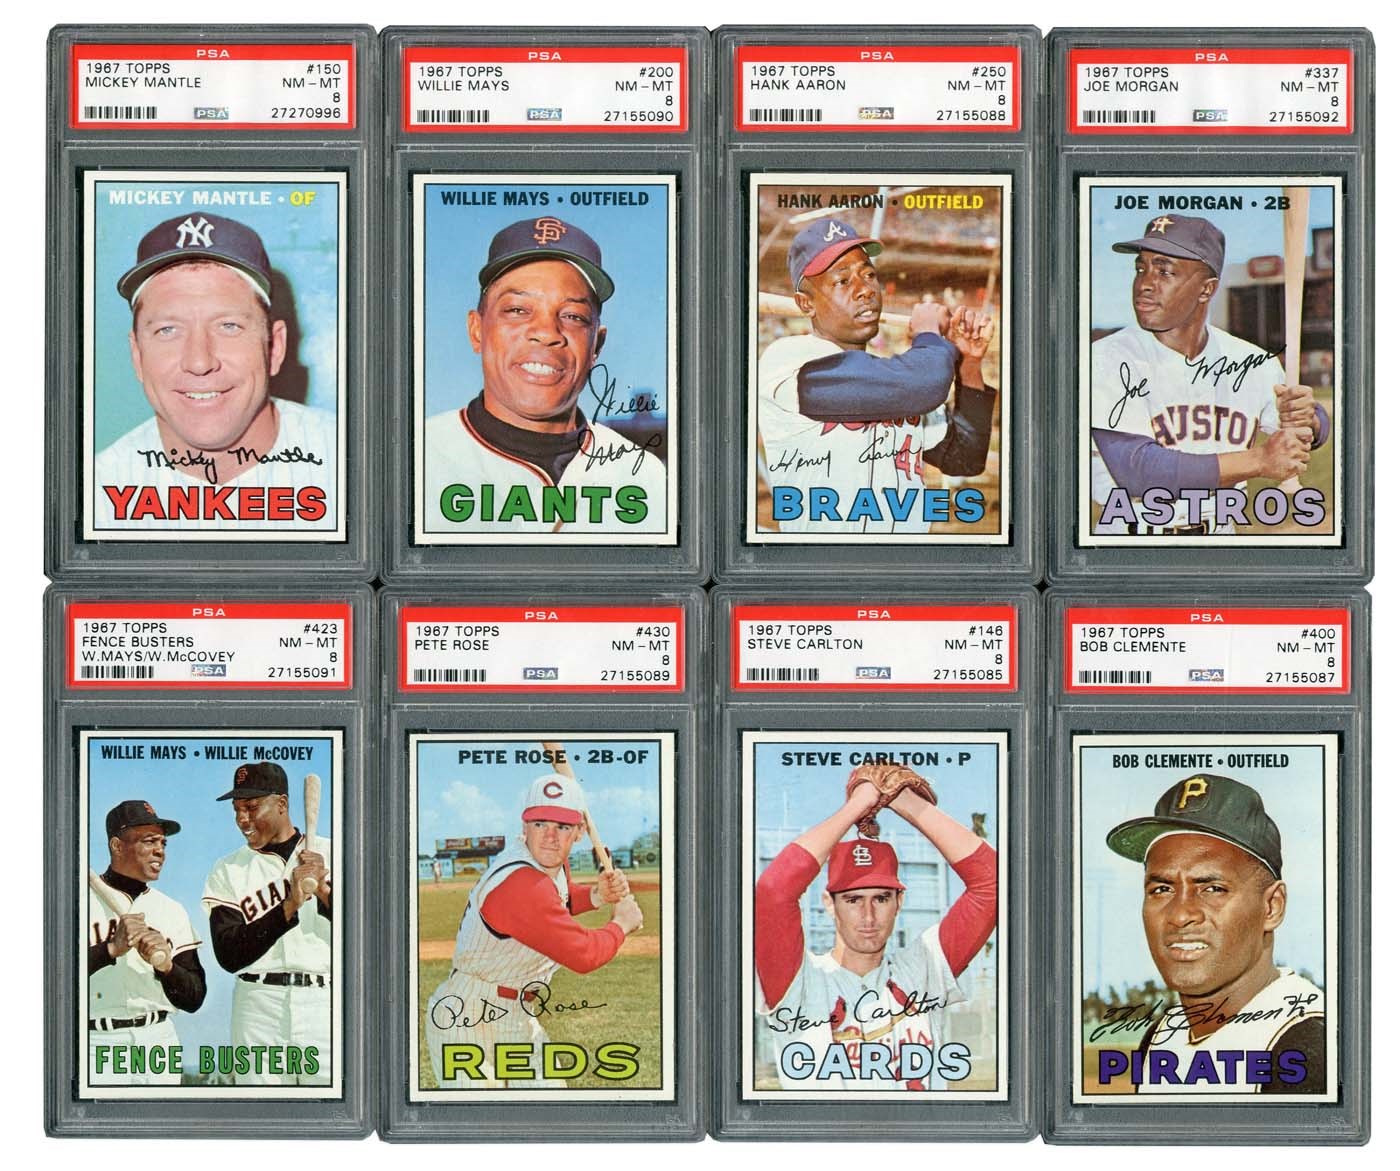 1967 Topps VERY HIGH GRADE Partial Set with PSA 8 Mantle!